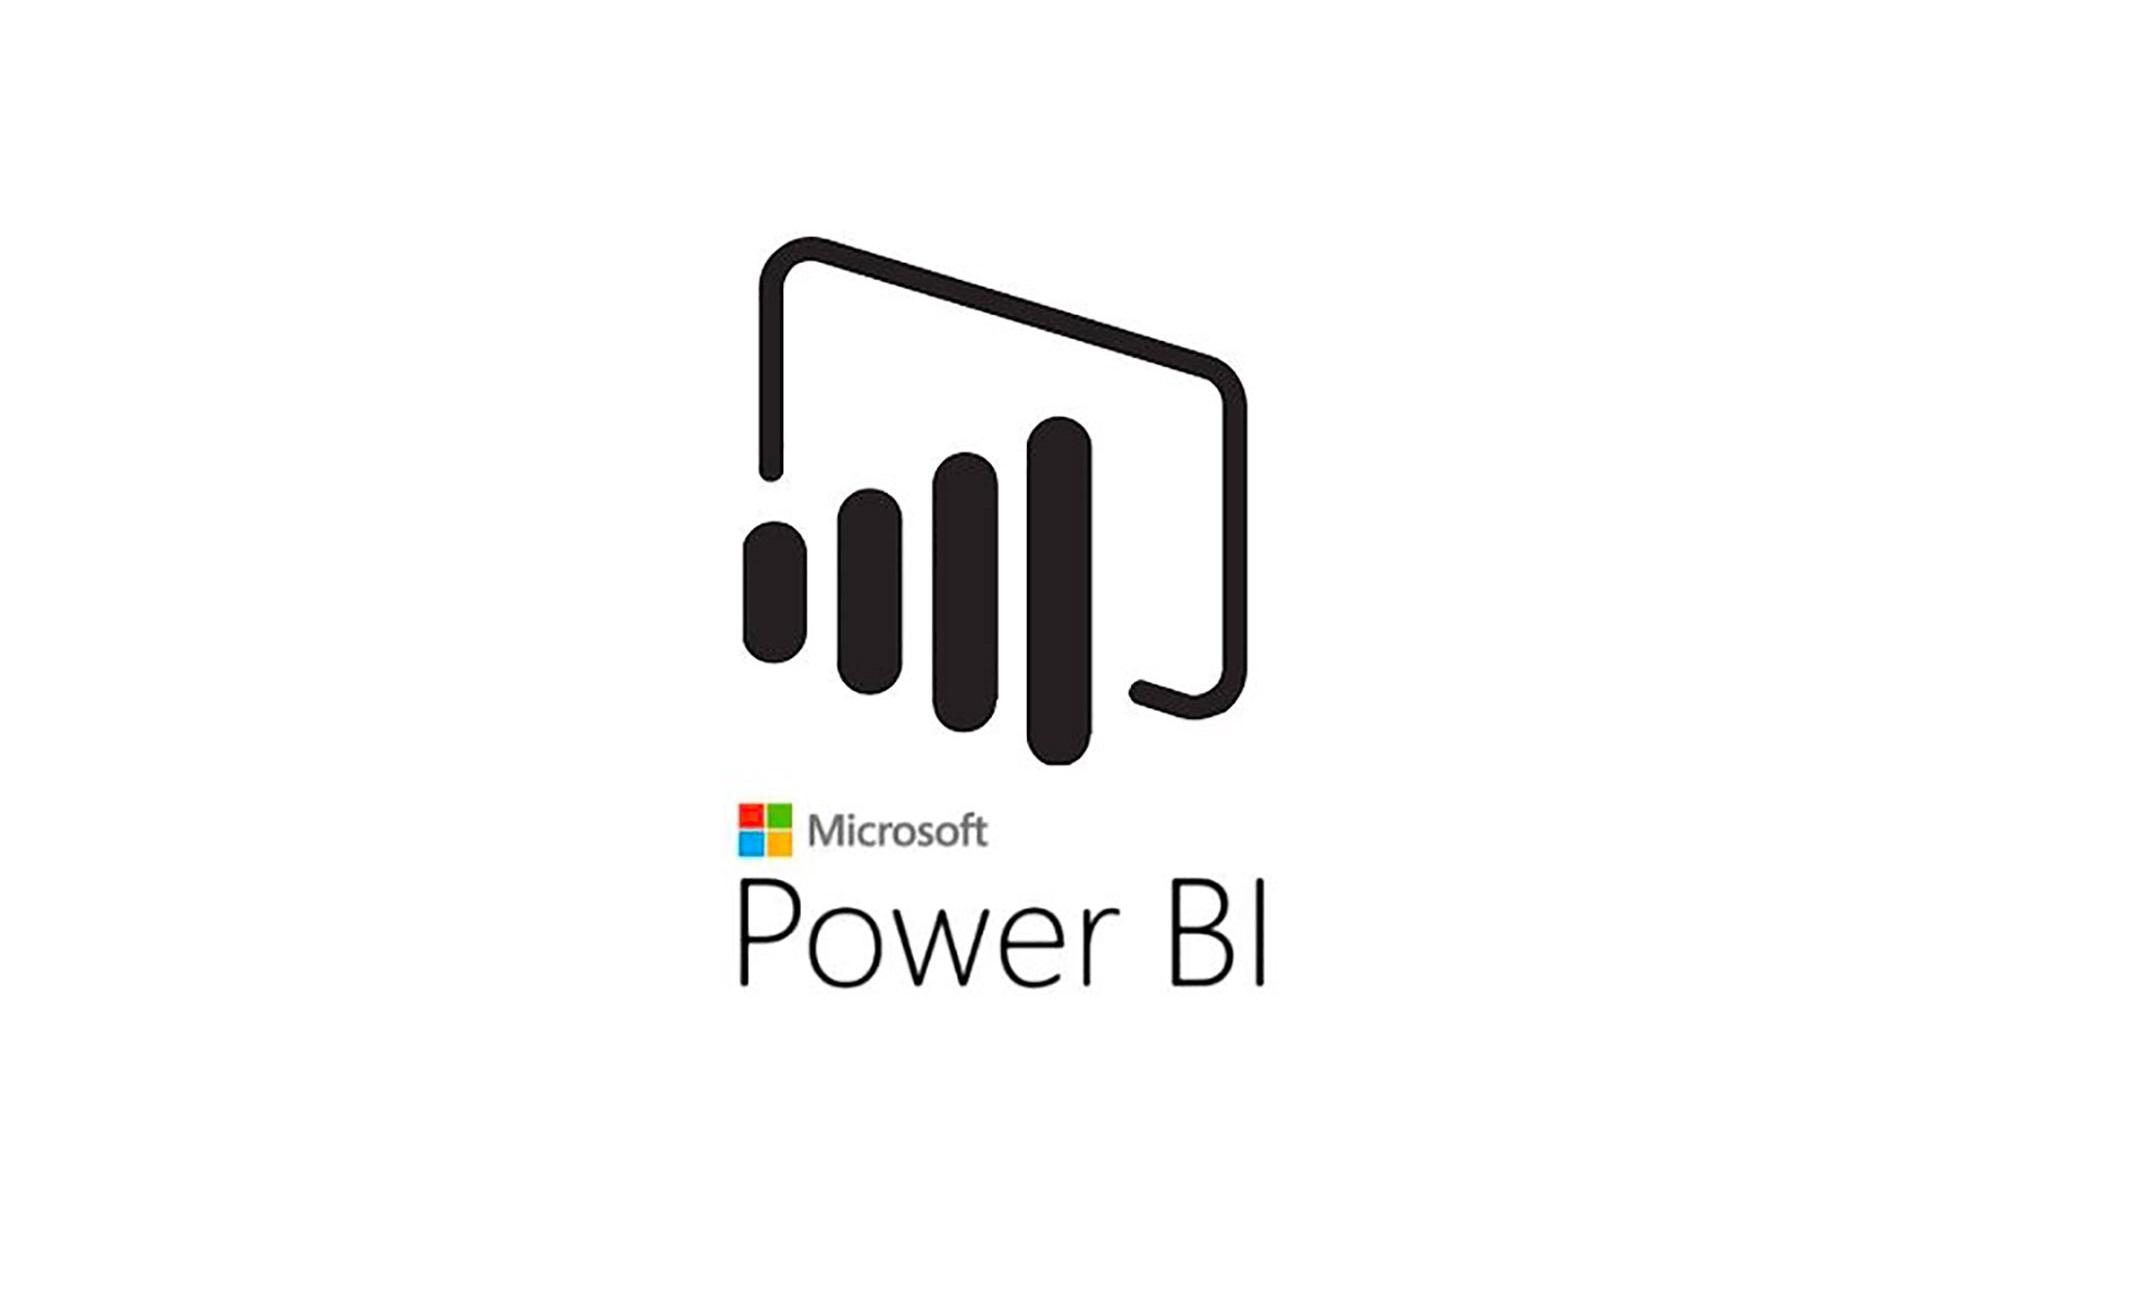 4 Weeks Microsoft Power BI Training in Chula Vista | Introduction to Power BI training for beginners | Getting started with Power BI | What is Power BI | June 1, 2020 - June 24, 2020